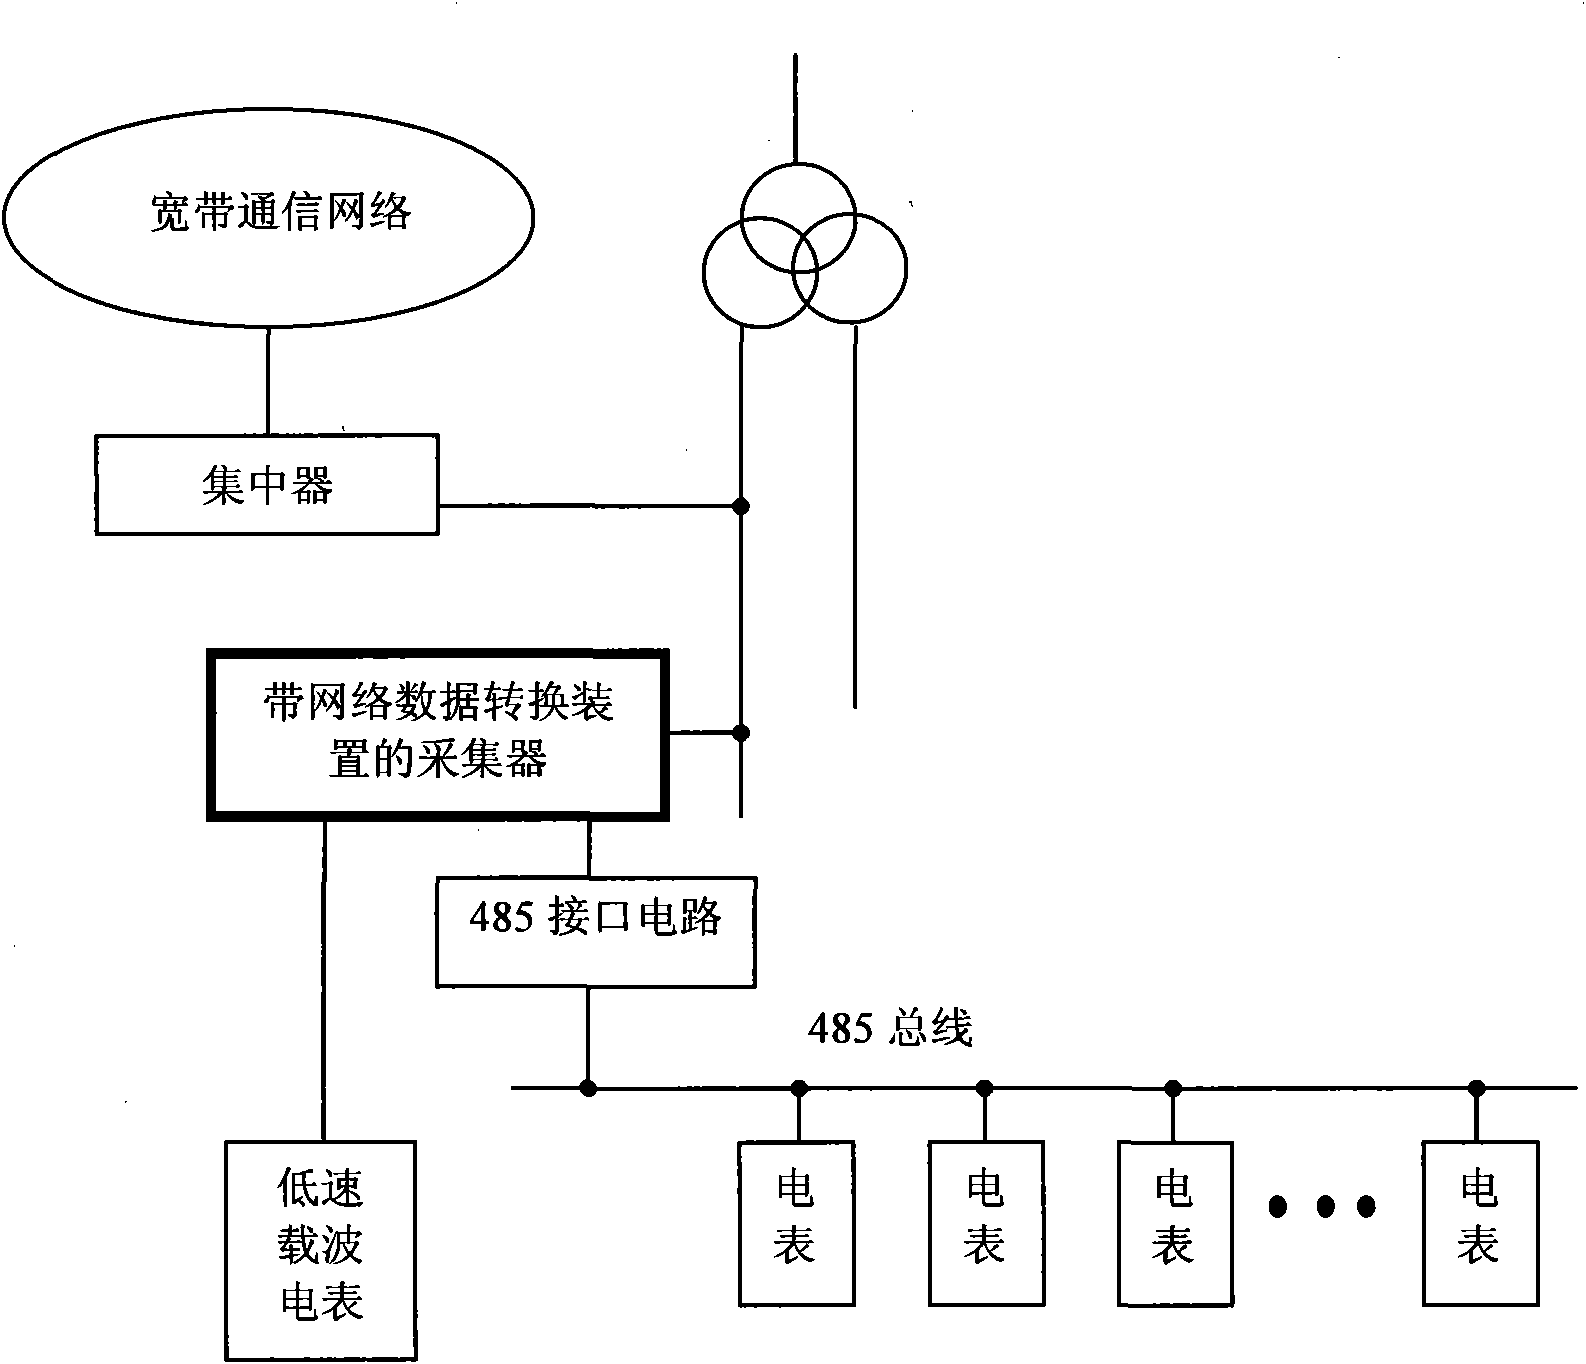 Network data conversion device based on power line carrier communication and conversion method thereof